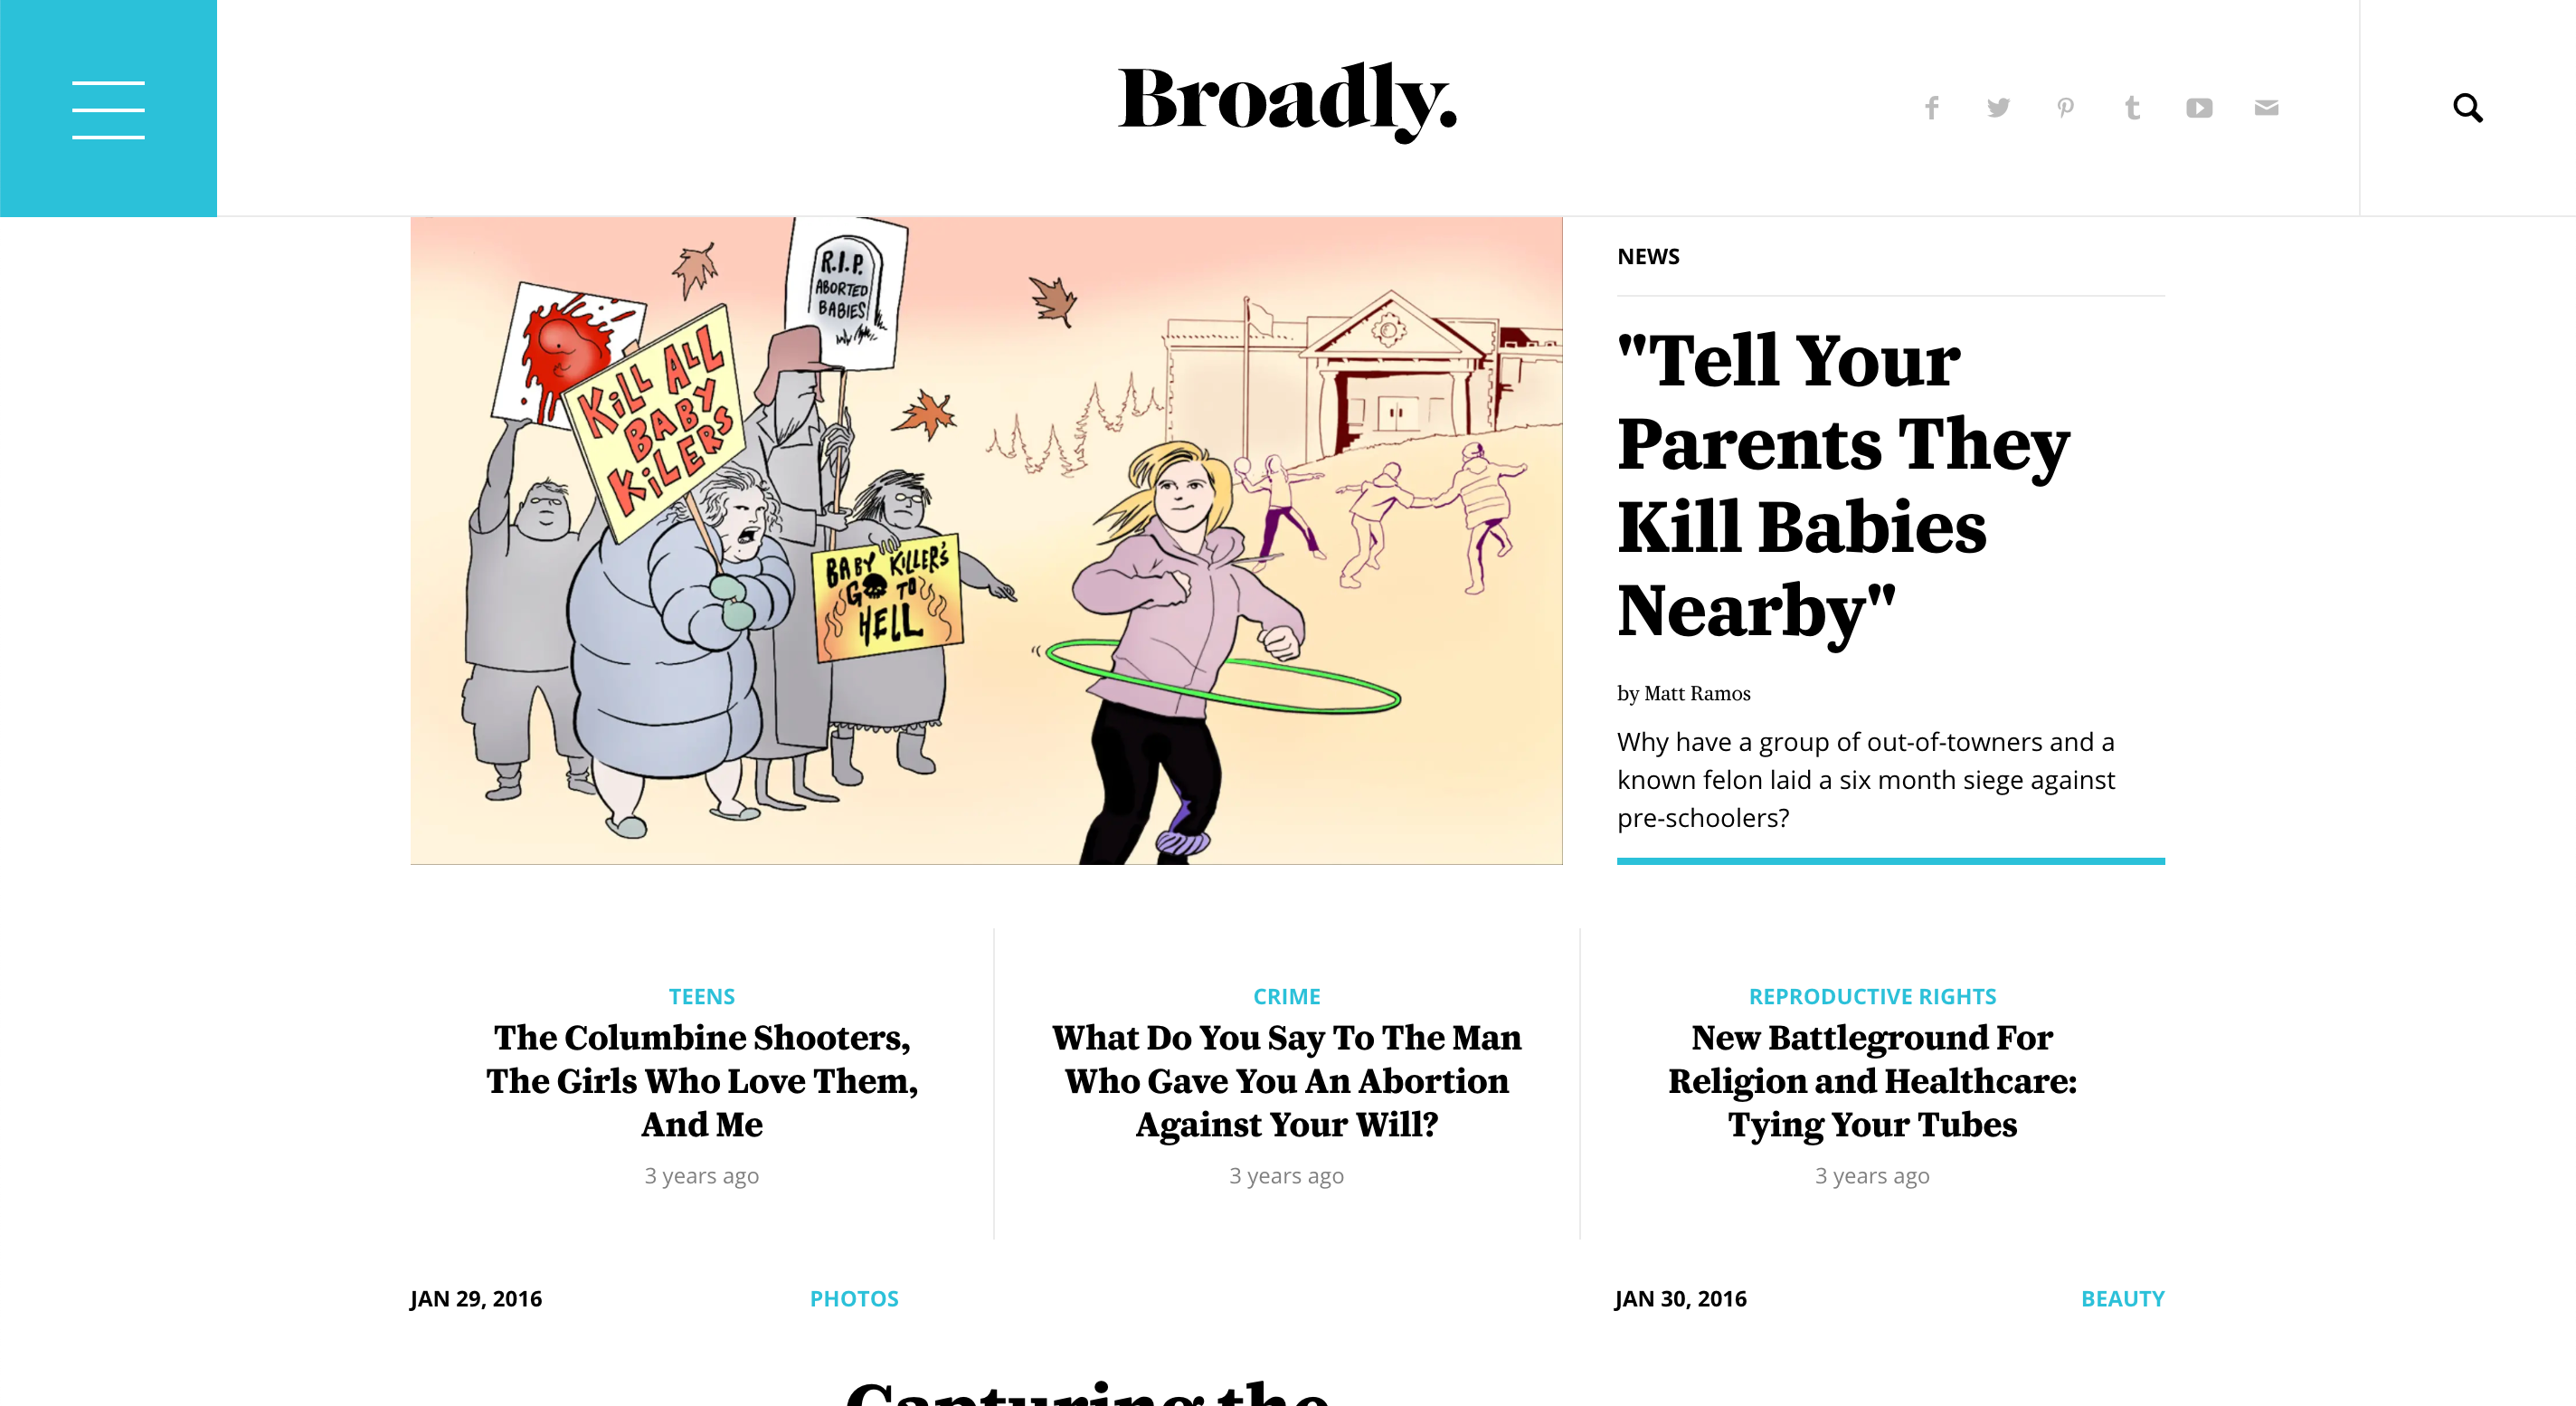 Broadly's homepage in 2016